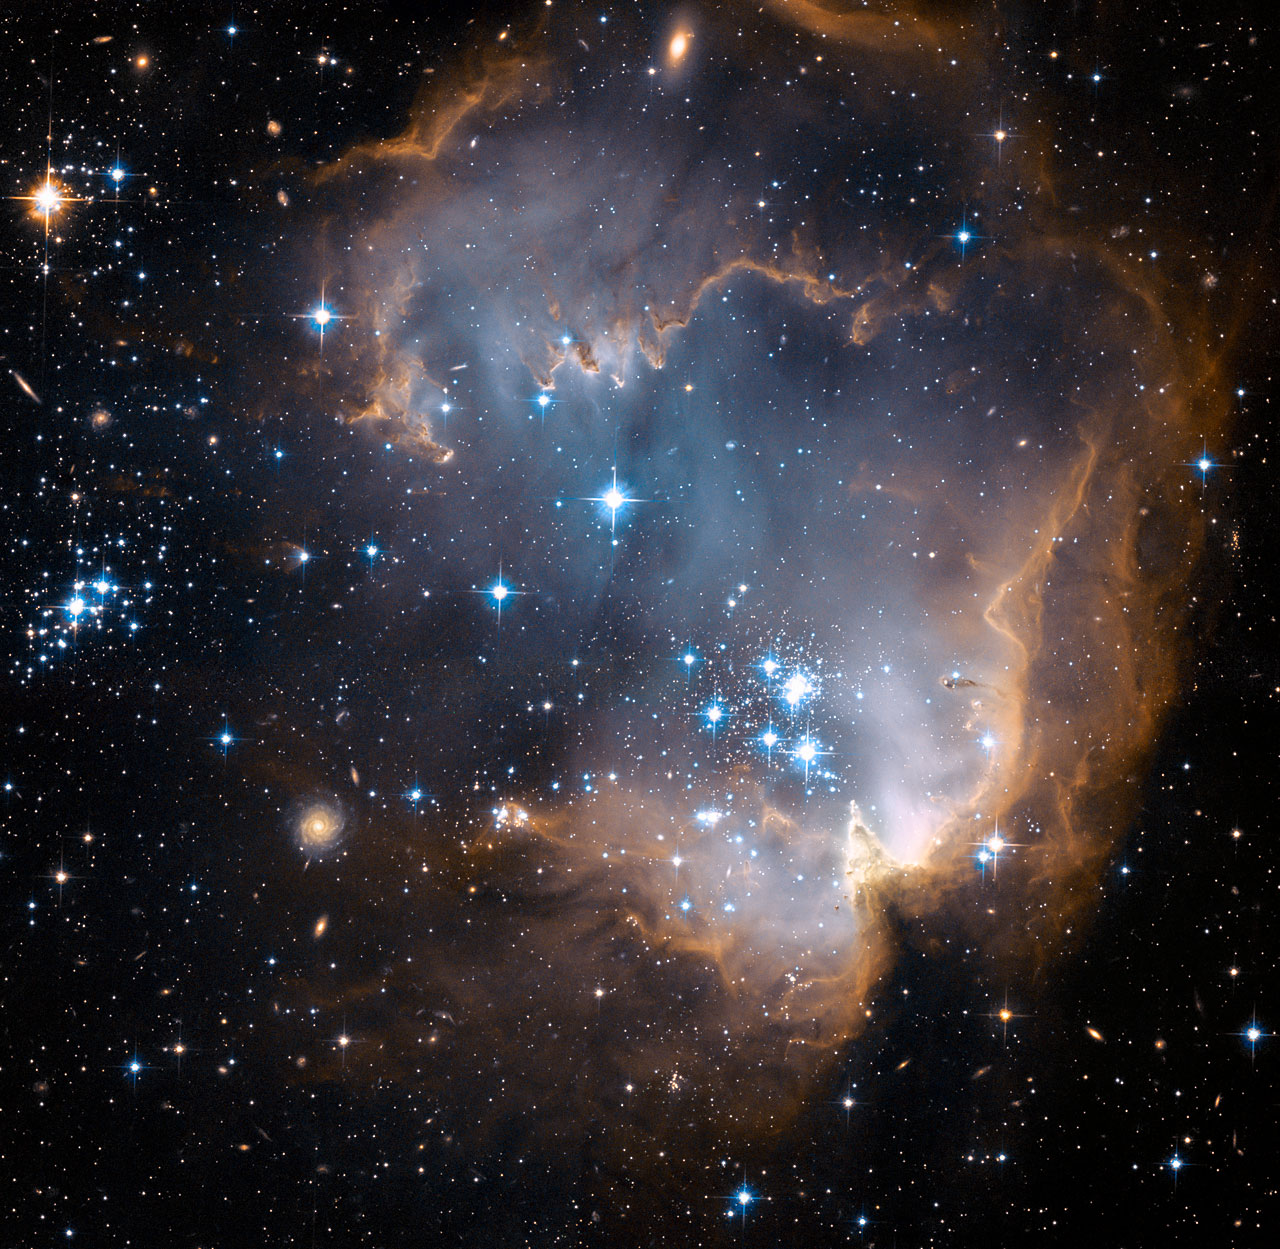 N90 nebula, "New stars shed light on the past" by ESA/Hubble